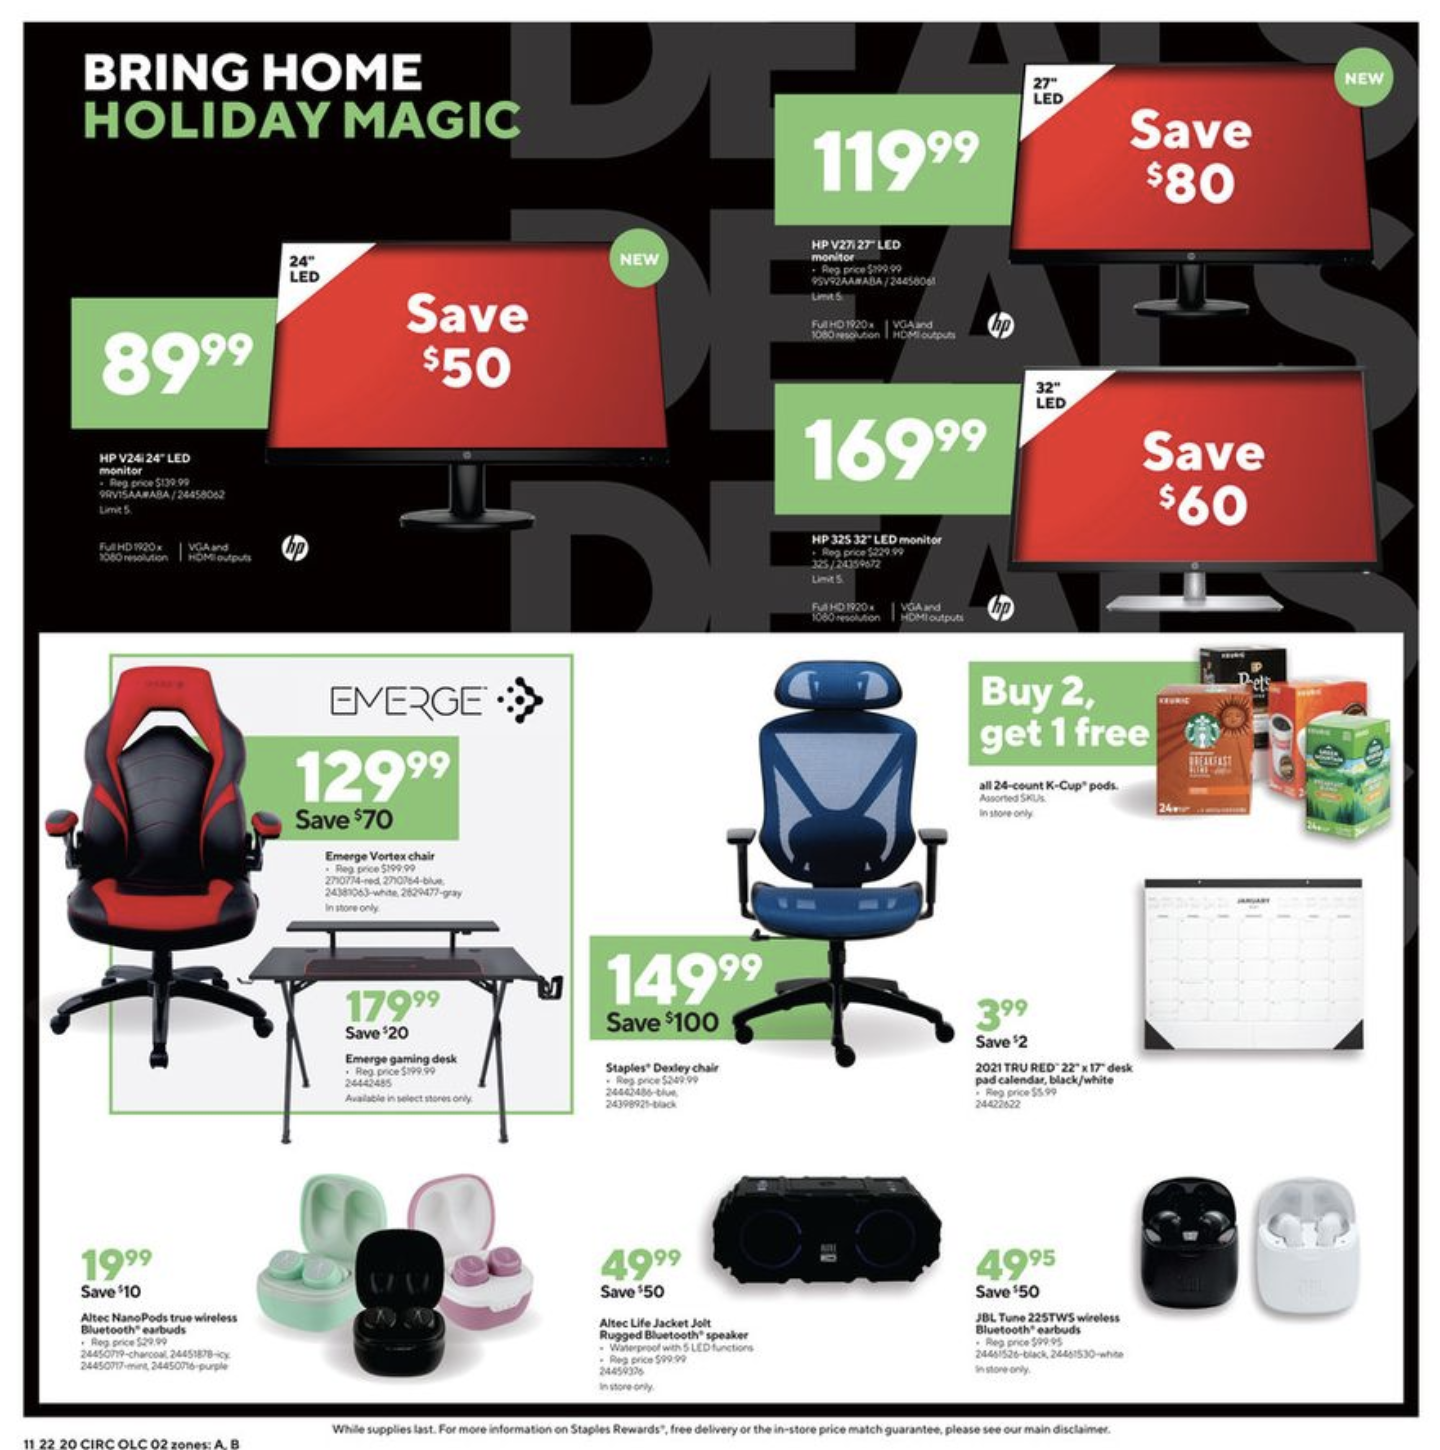 Staples Black Friday ad revealed in full with deals on Apple, Echo